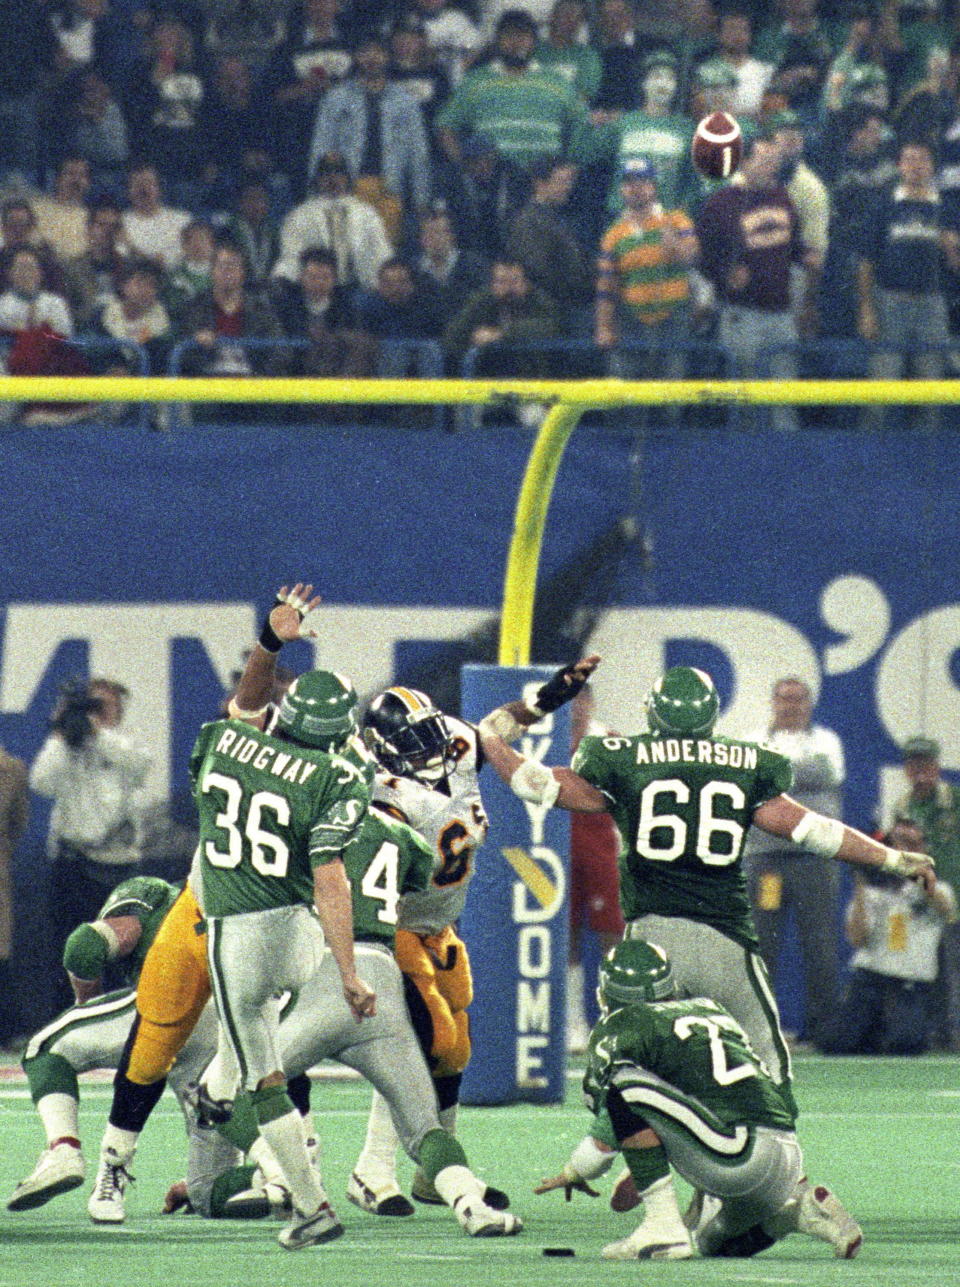 Saskatchewan Roughriders kicker Dave Ridgway kicks the winning field goal during the 1989 Grey Cup game against the Hamilton Tiger Cats in Toronto. (The Canadian Press)